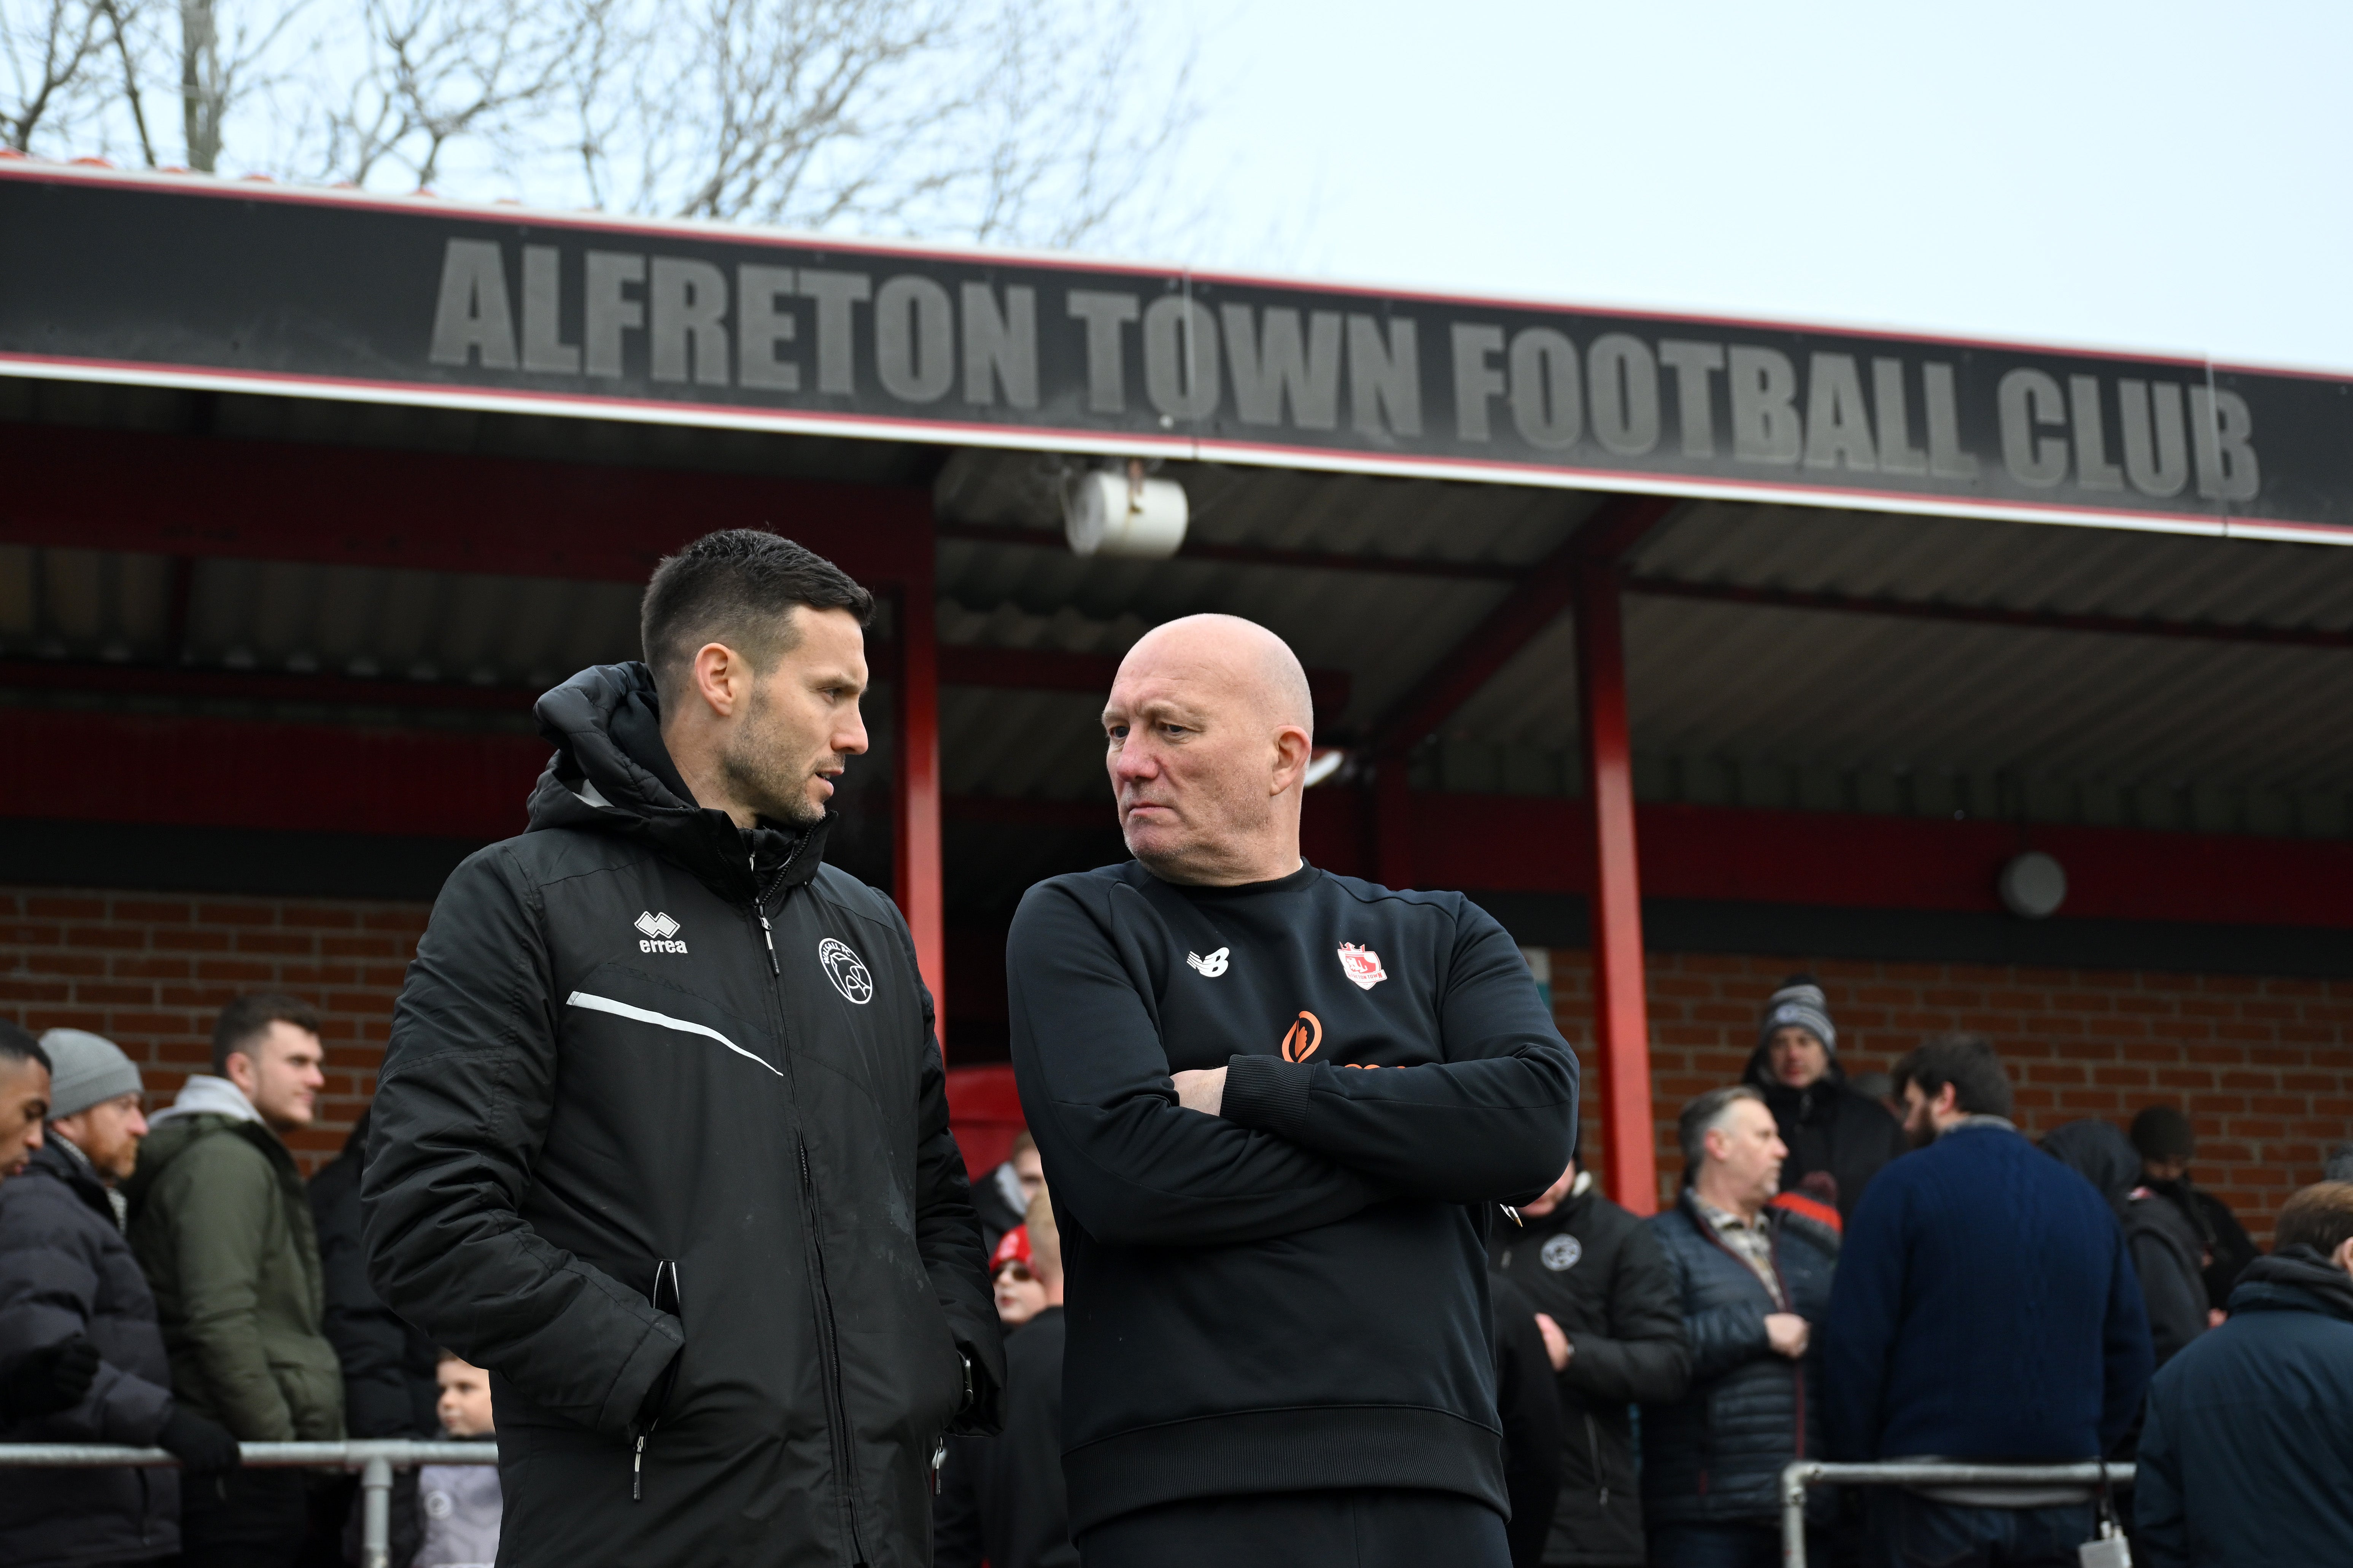 Alfreton Town’s match FA Cup second-round clash with Walsall was called off minutes before kick off